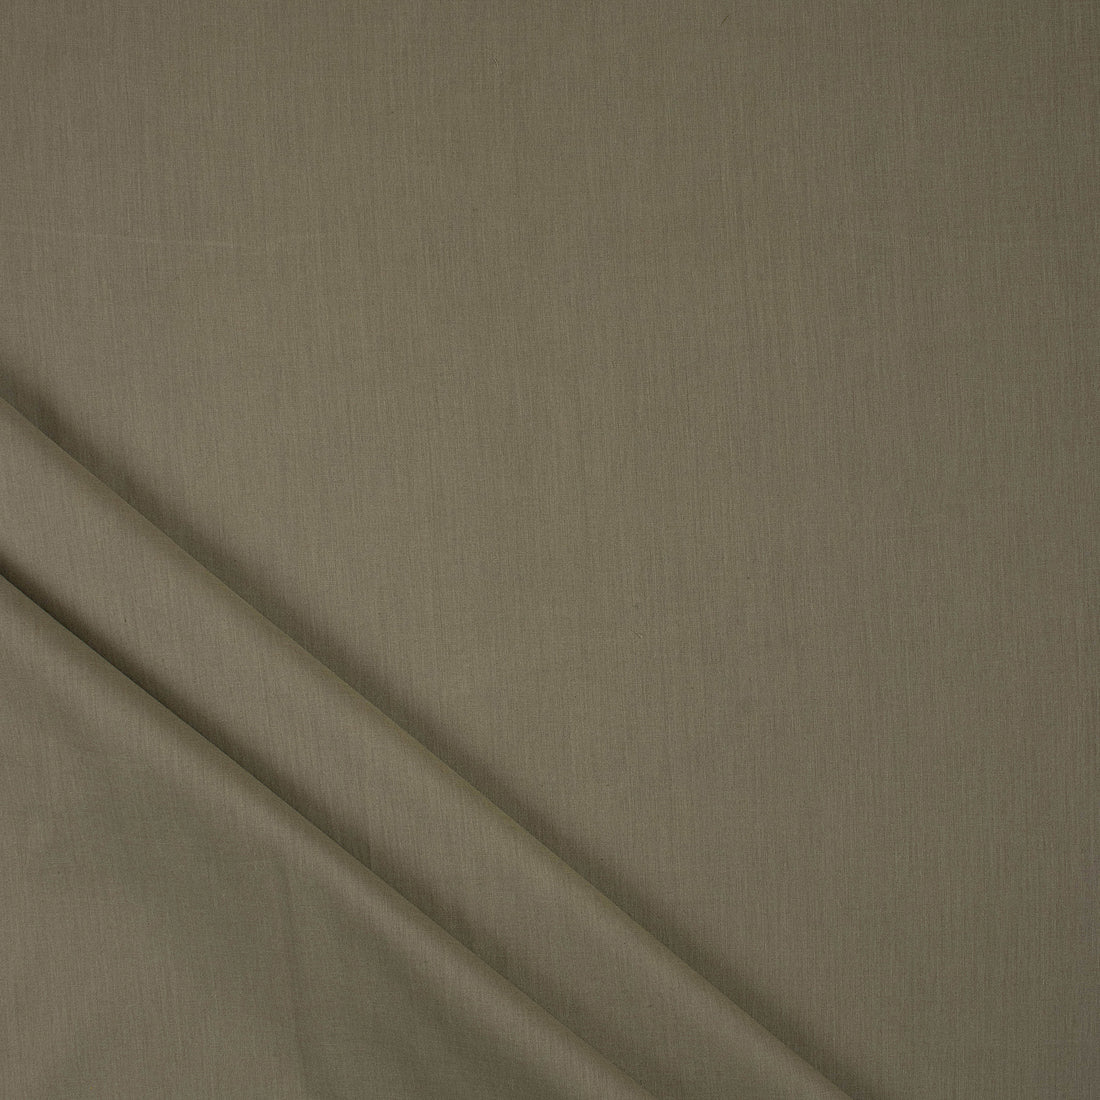 Soft Cotton Natural Dyed Solid Grey Fabric